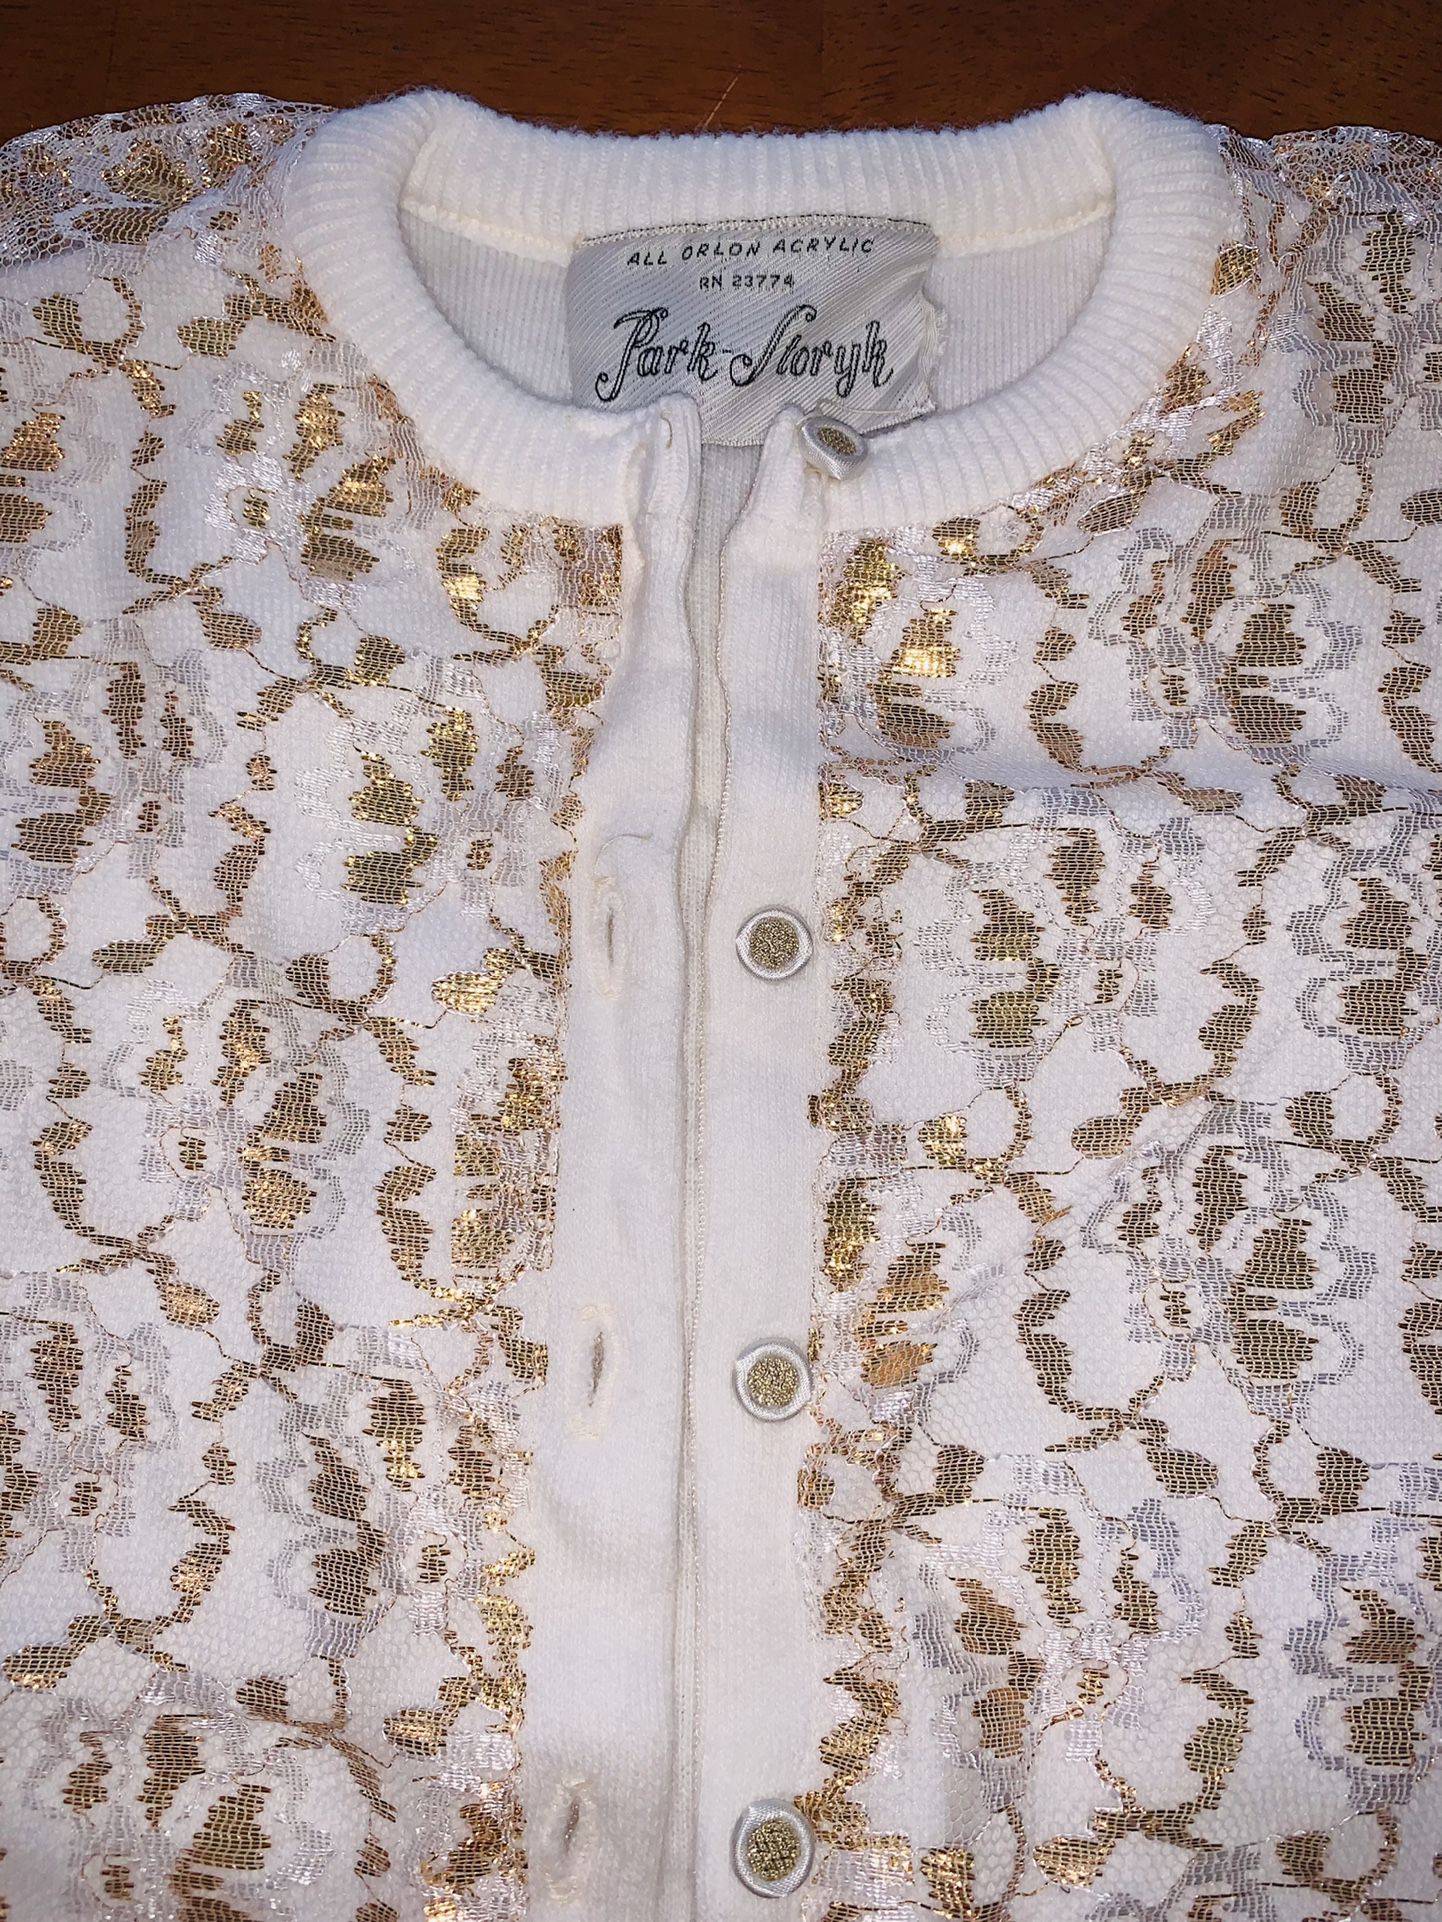 LADIES GOLD & WHITE LACE CARDIGAN ORLON ACRYLIC by PARK STORYK “ OPEN BOX UNUSED “ SEE ALL PICTURES “ PROTECTIVE SEALED BAG